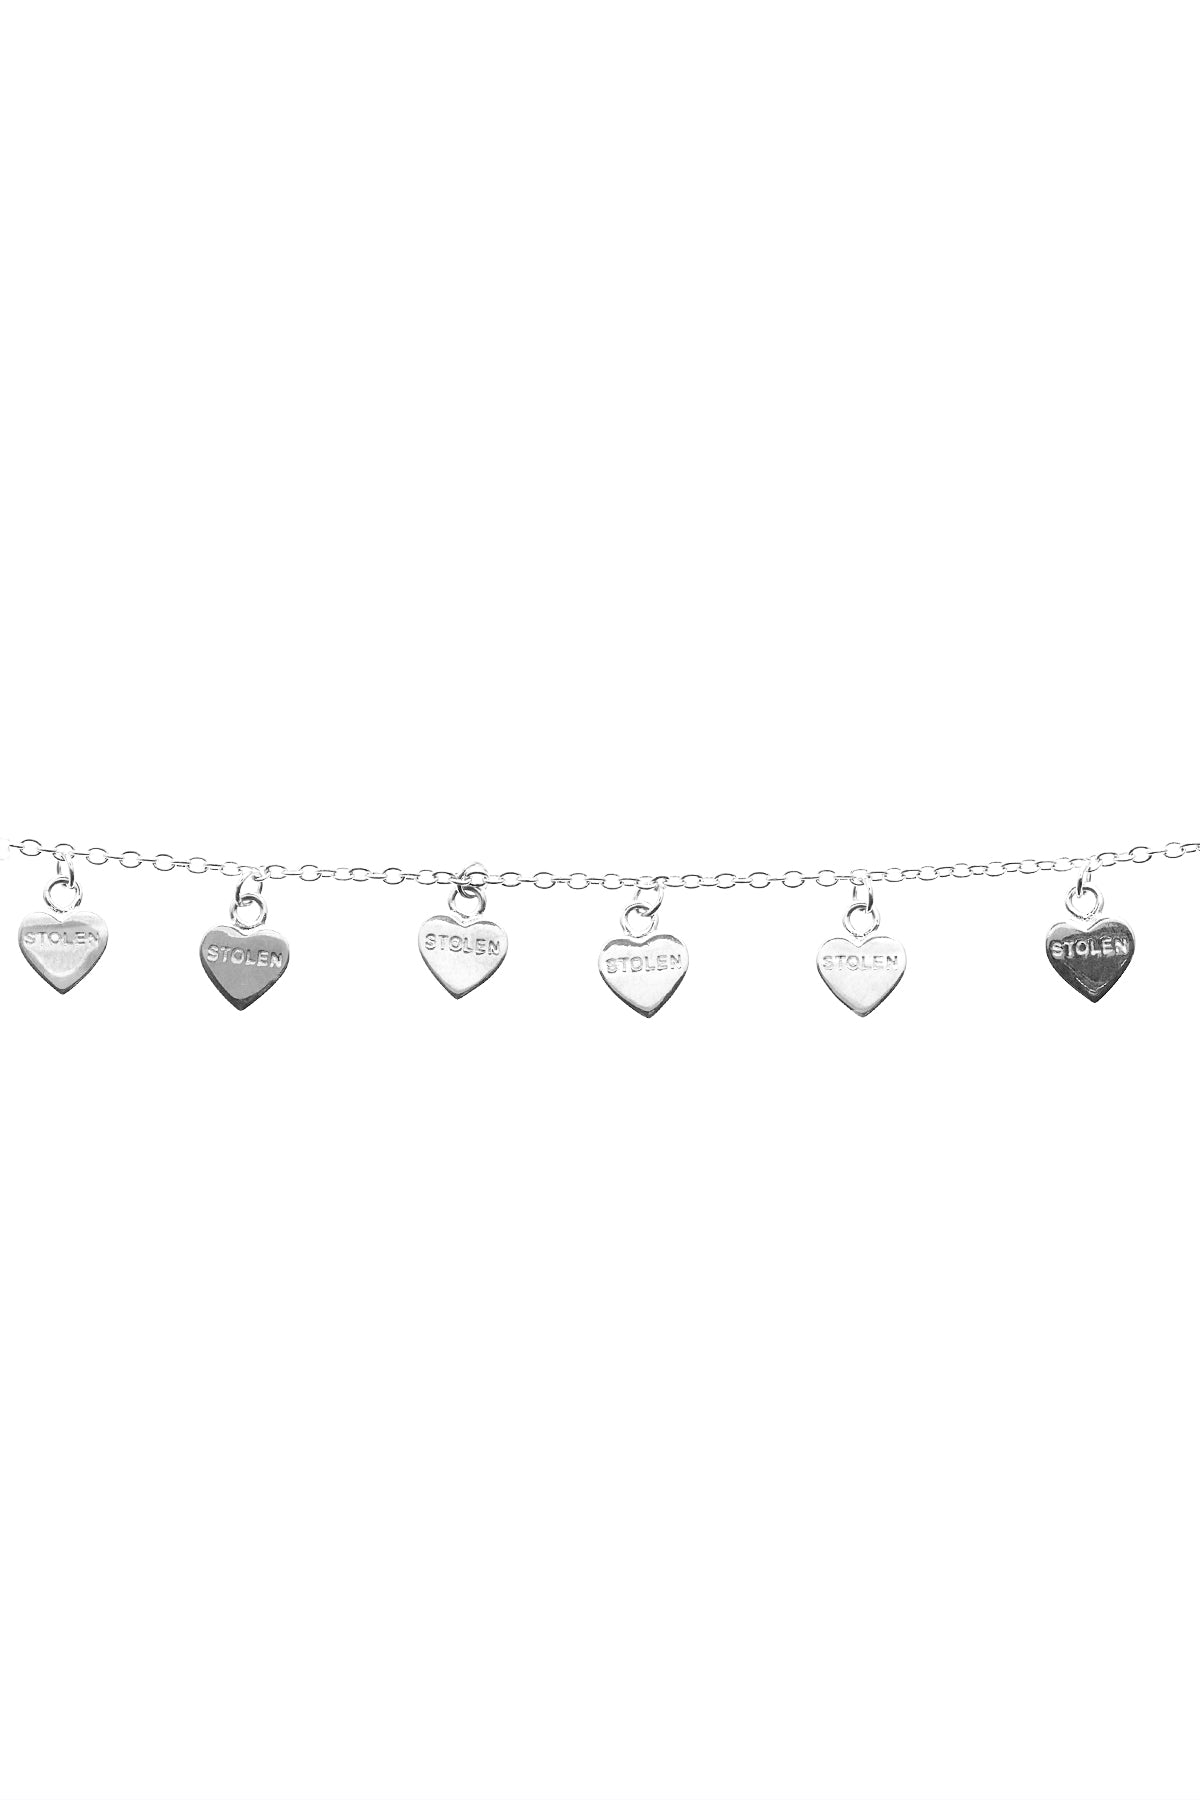 Stylish Love Heart Tag Charm Bracelet In Sterling Silver With Heart Design  Perfect Party Jewelry Accessories And Gift For Girlfriend No B215R From  Ai790, $15.2 | DHgate.Com